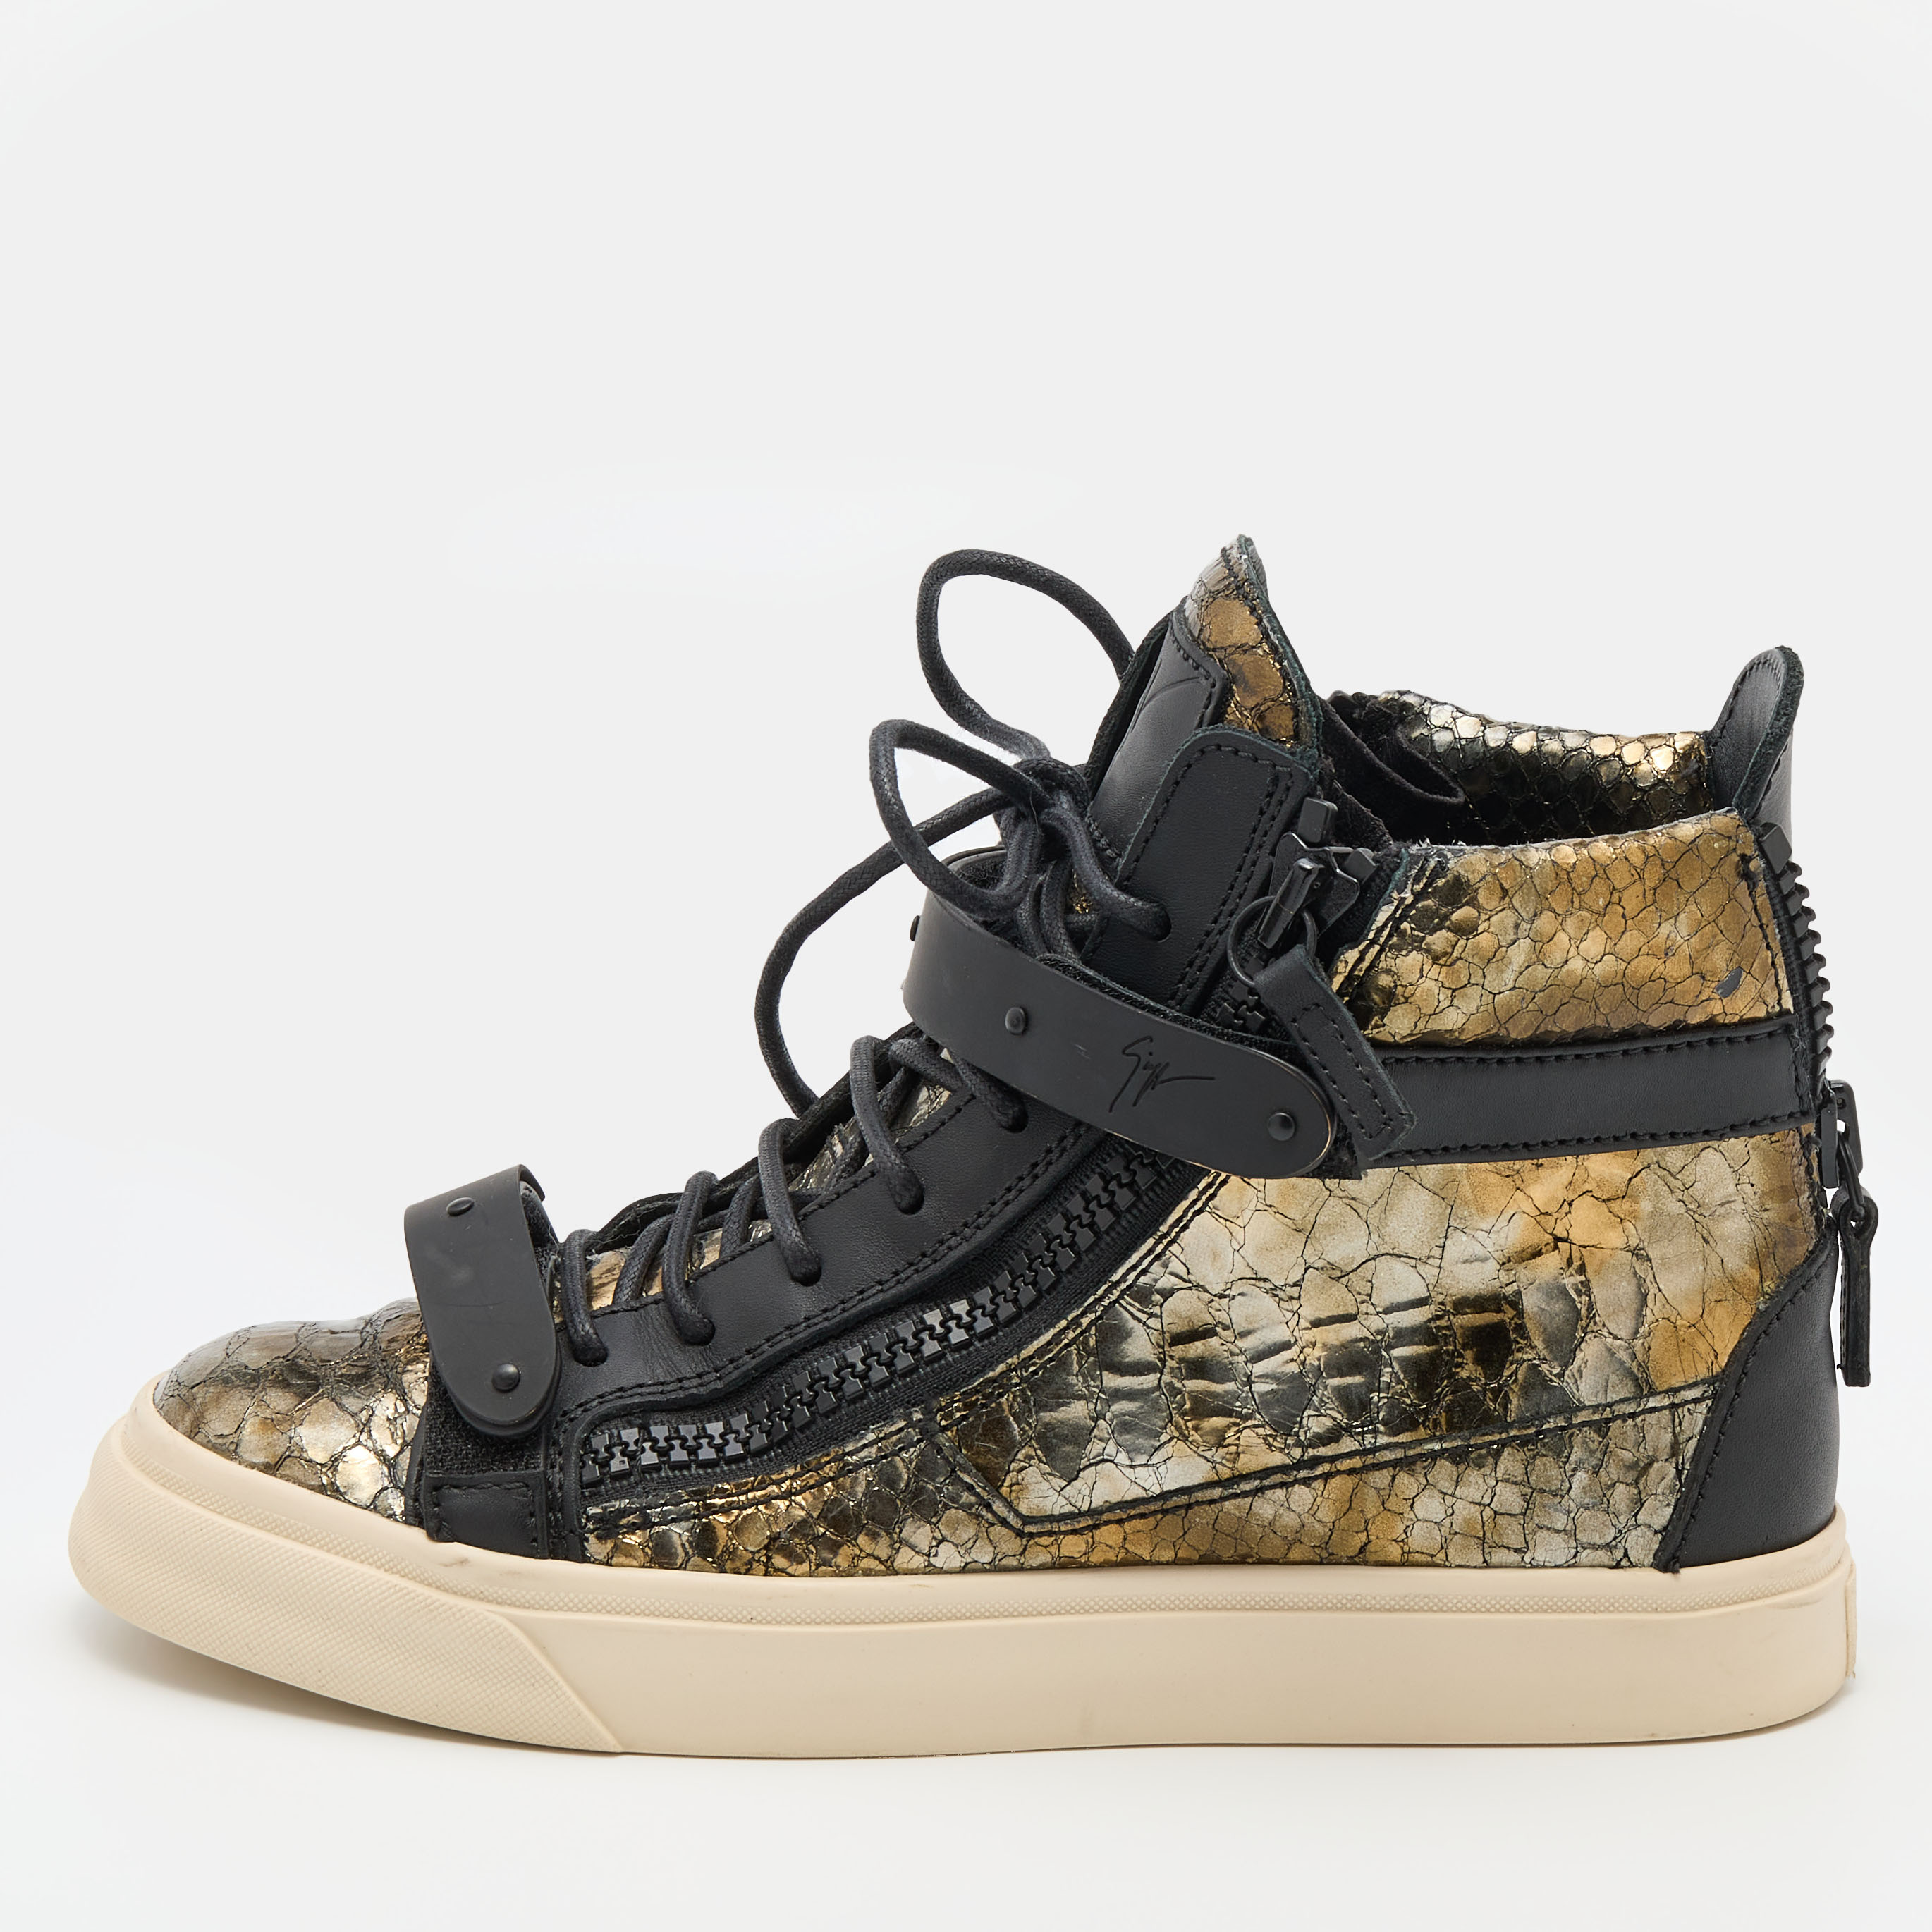 Giuseppe zanotti gold/black python embossed leather coby high top sneakers size 37